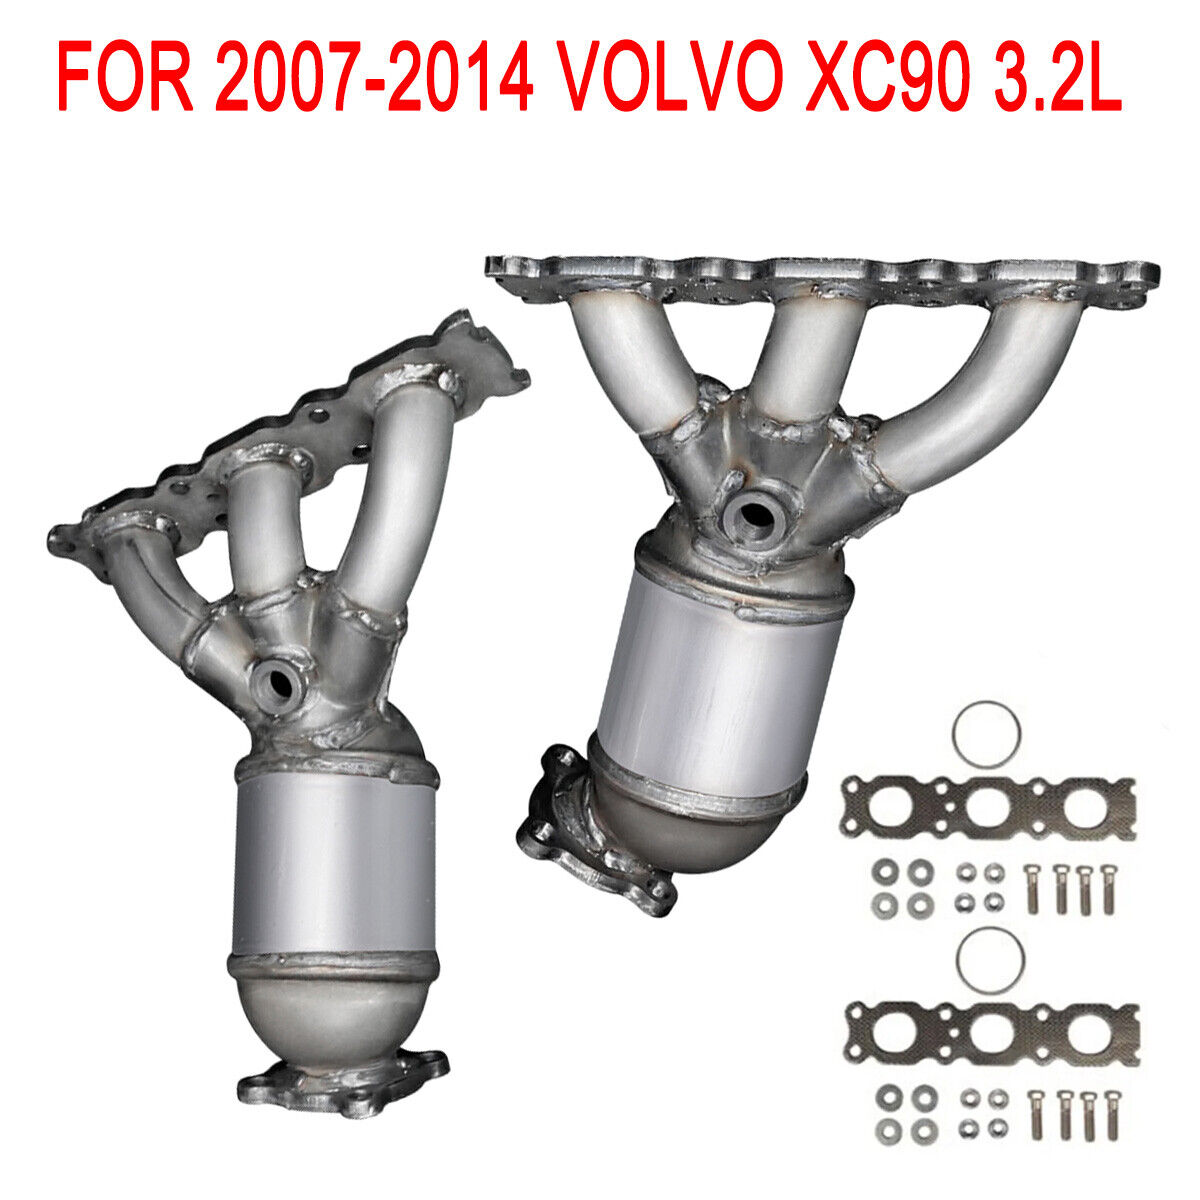 Exhaust Manifold Catalytic Converter For 2007-2014 Volvo XC90 3.2L 16664 16665